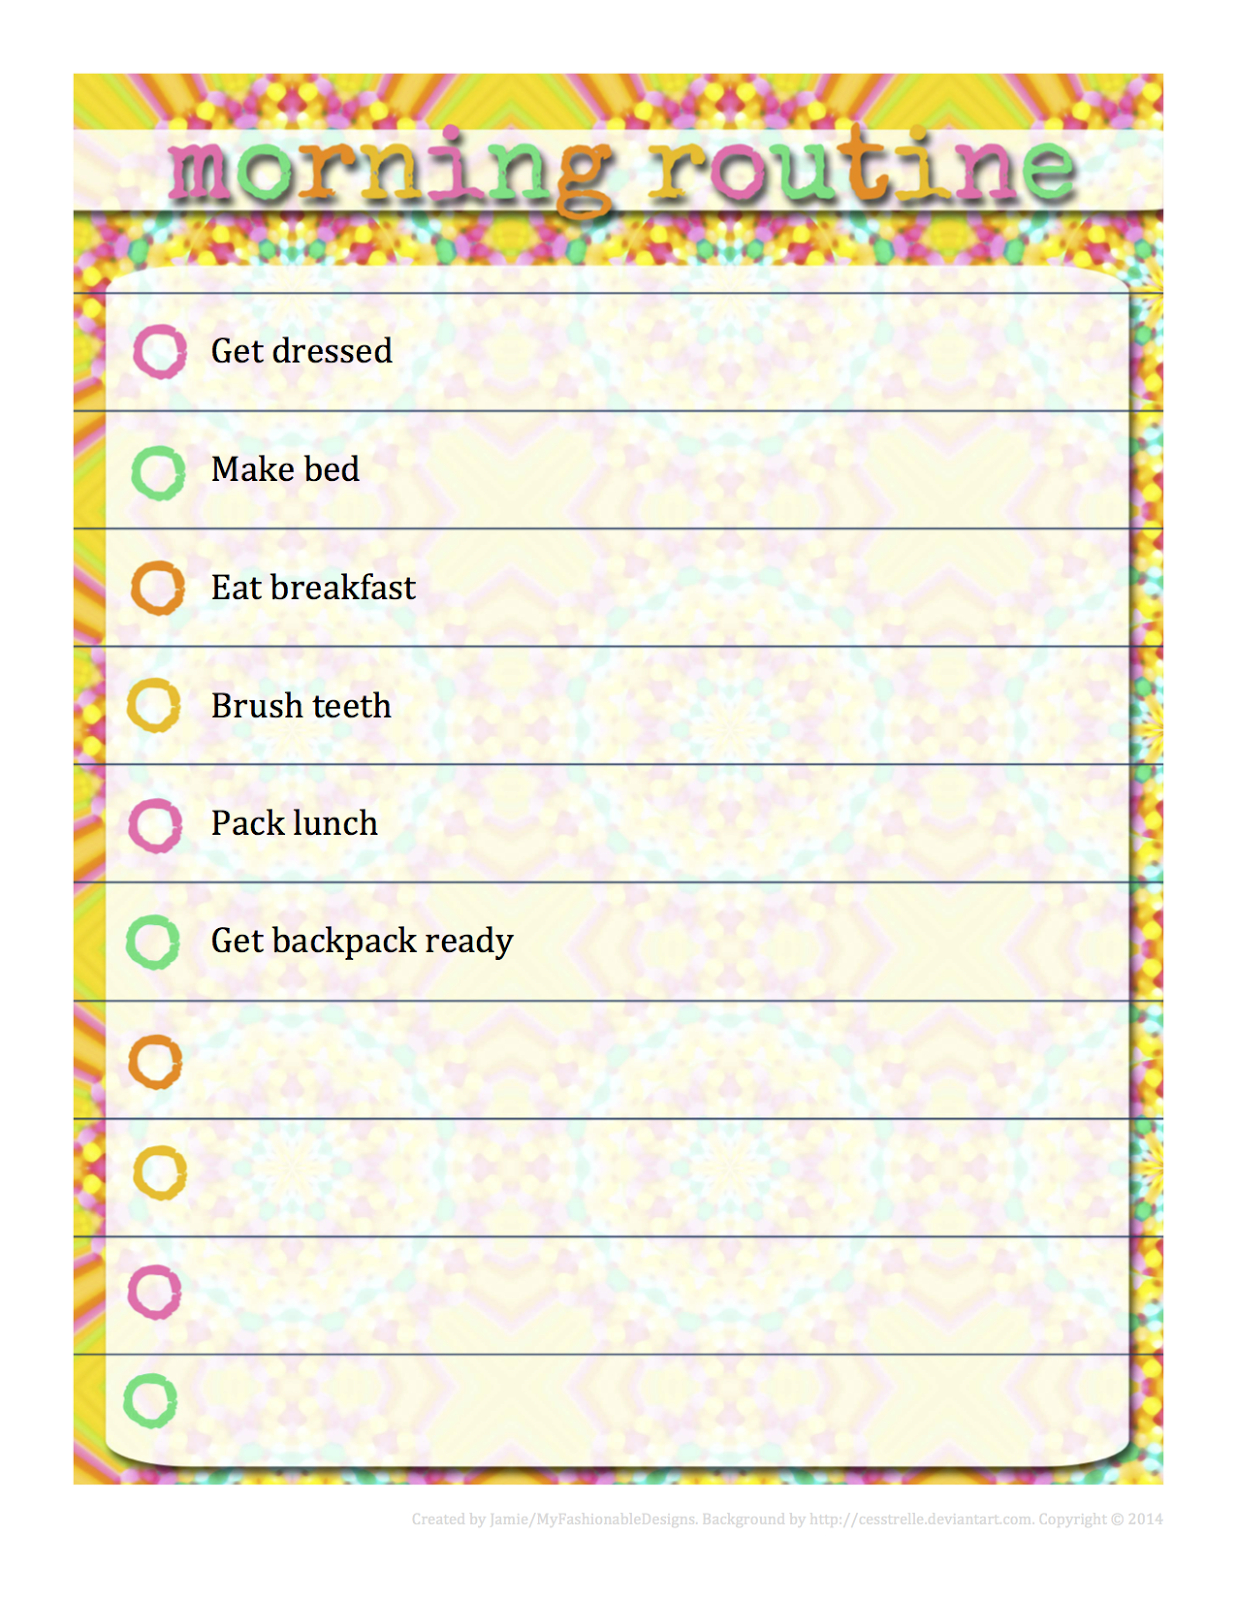 Morning Routine Chart - Free Download - Editable In Word! | Kids - Free Printable Morning Routine Chart